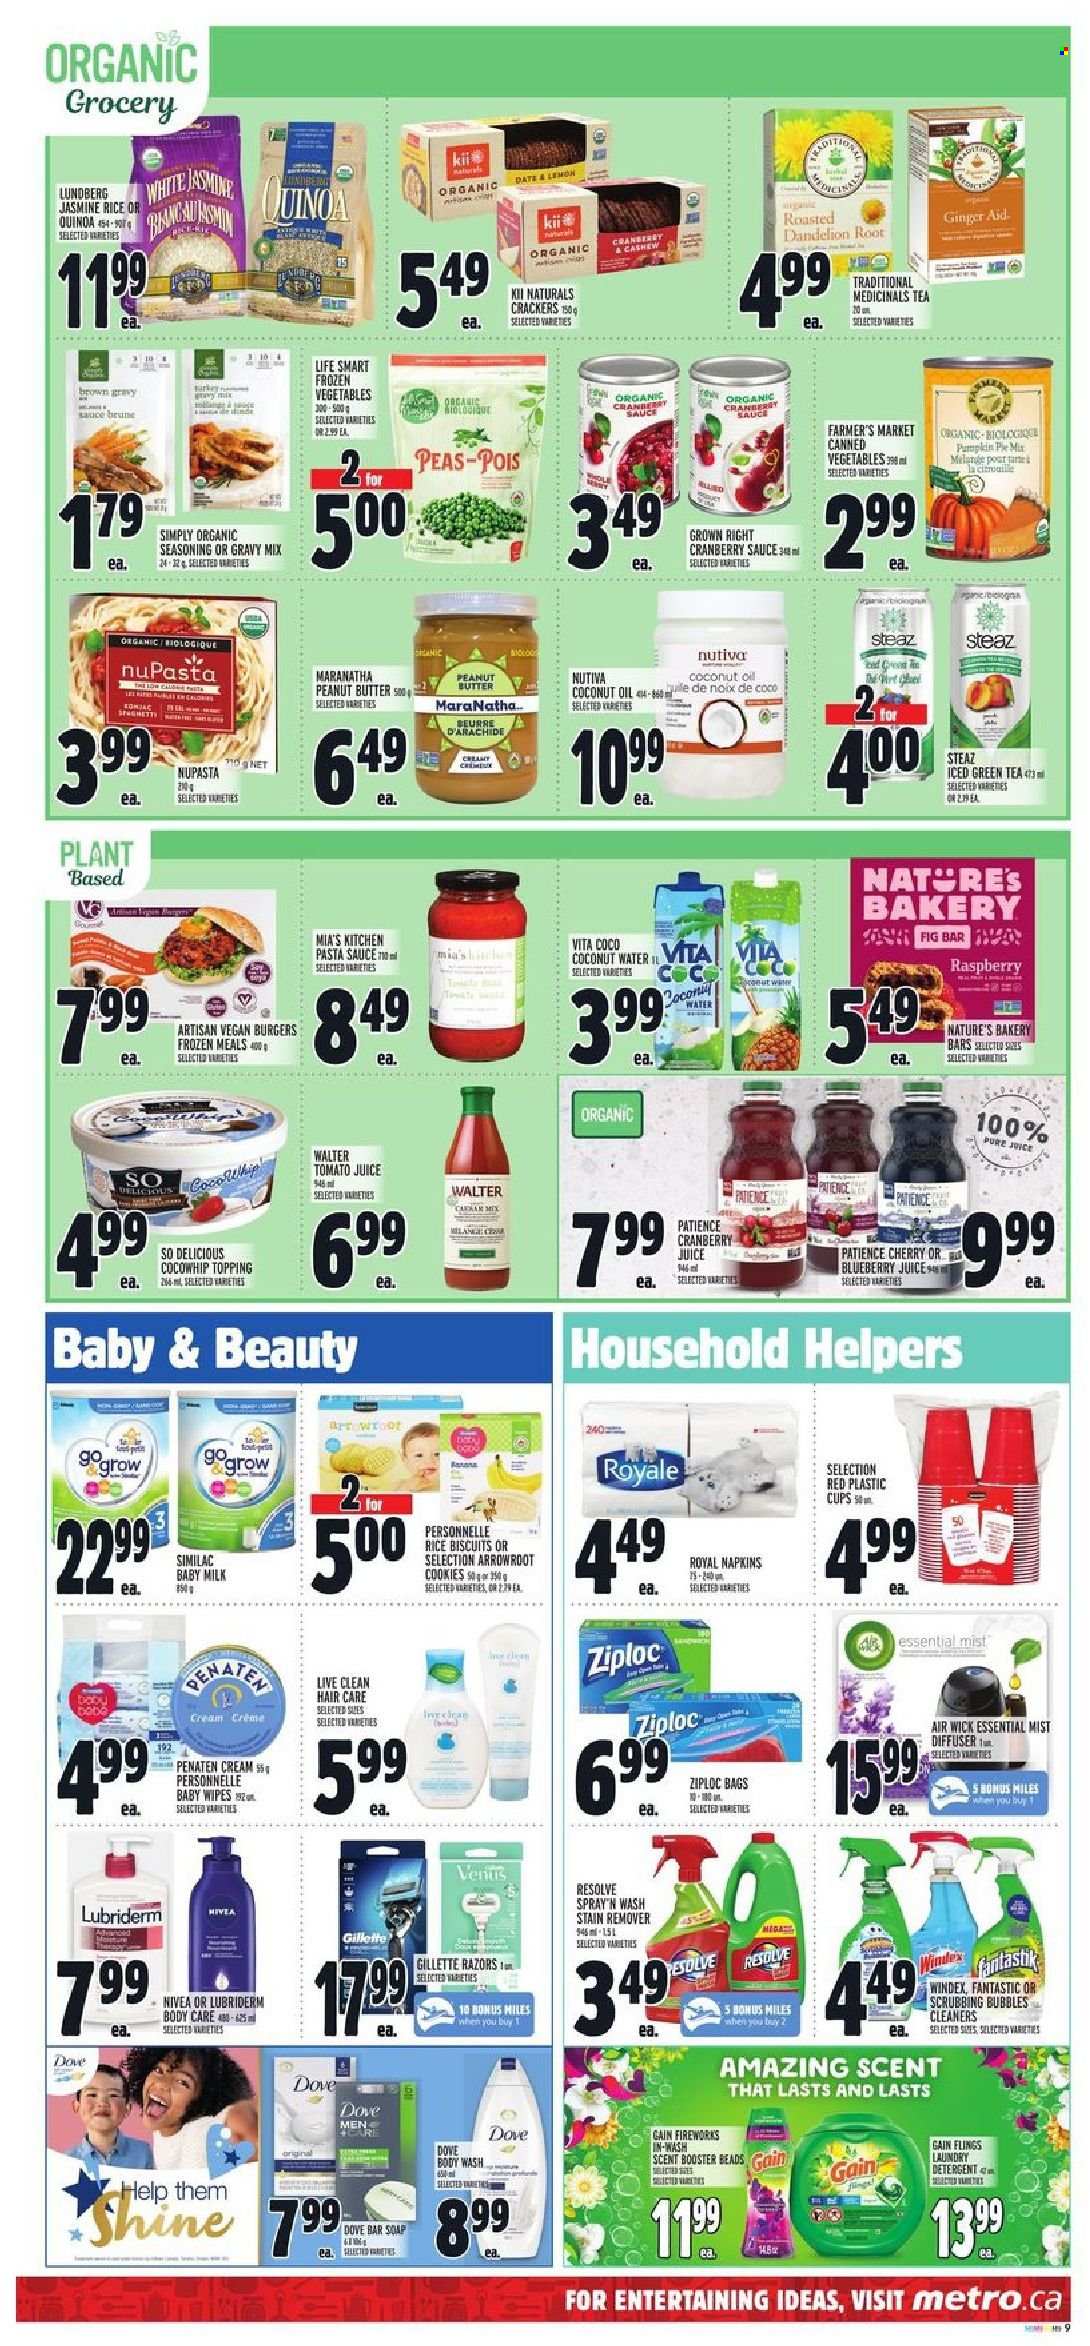 thumbnail - Metro Flyer - September 30, 2021 - October 06, 2021 - Sales products - pie, ginger, pumpkin, peas, cherries, pasta sauce, hamburger, sauce, veggie burger, milk, frozen vegetables, cookies, crackers, biscuit, topping, canned vegetables, jasmine rice, gravy mix, spice, coconut oil, oil, cranberry sauce, peanut butter, cranberry juice, juice, coconut water, green tea, tea, Similac, wipes, baby wipes, Gain, Windex, Scrubbing Bubbles, stain remover, laundry detergent, Gain Fireworks, body wash, soap bar, soap, Lubriderm, bag, Ziploc, cup, diffuser, Air Wick, detergent, Dove, Gillette, quinoa, Nivea. Page 12.